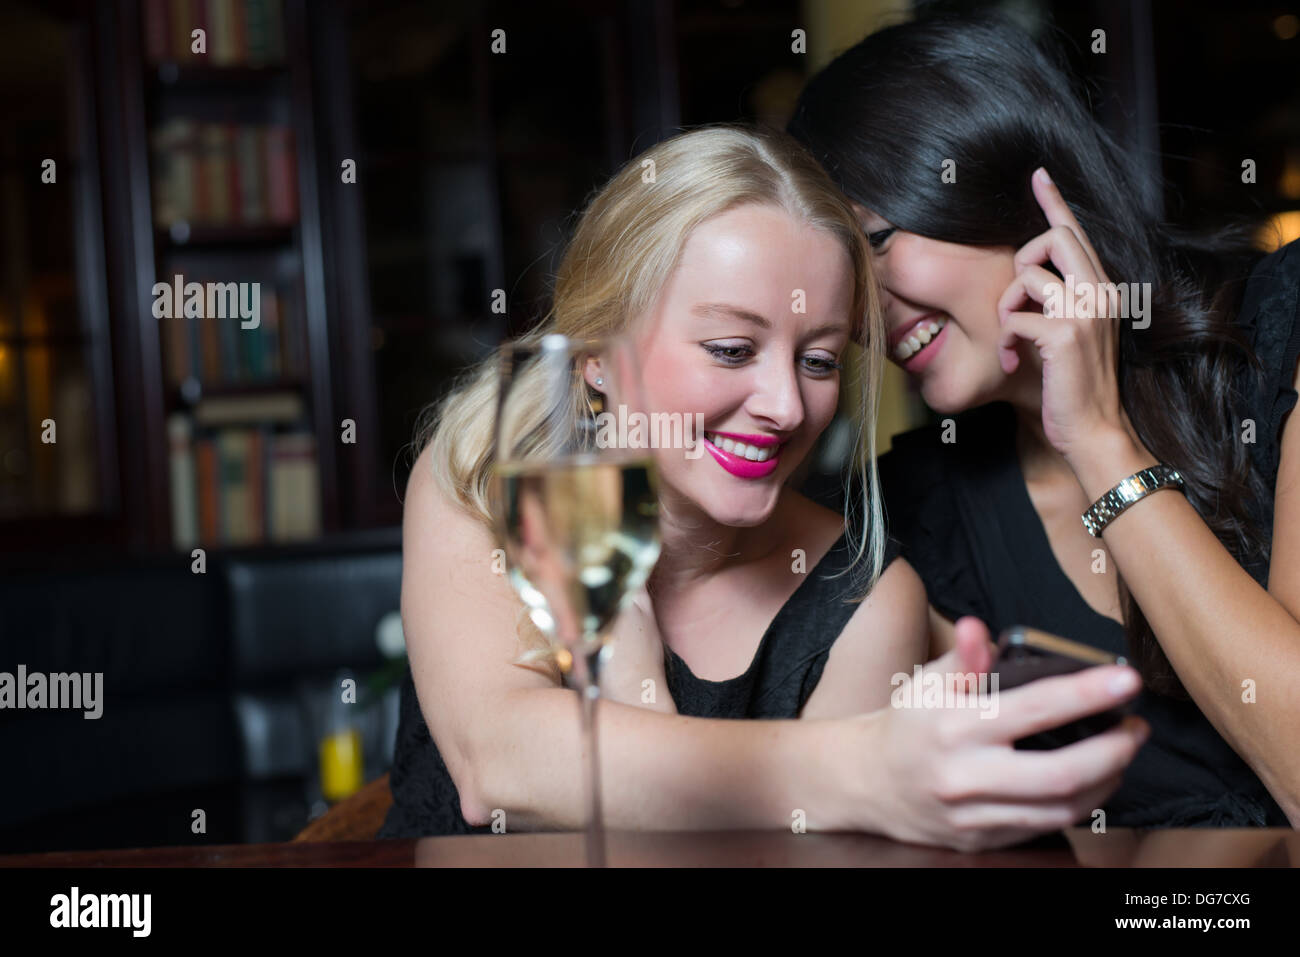 Two women on a night out using mobile phones Stock Photo